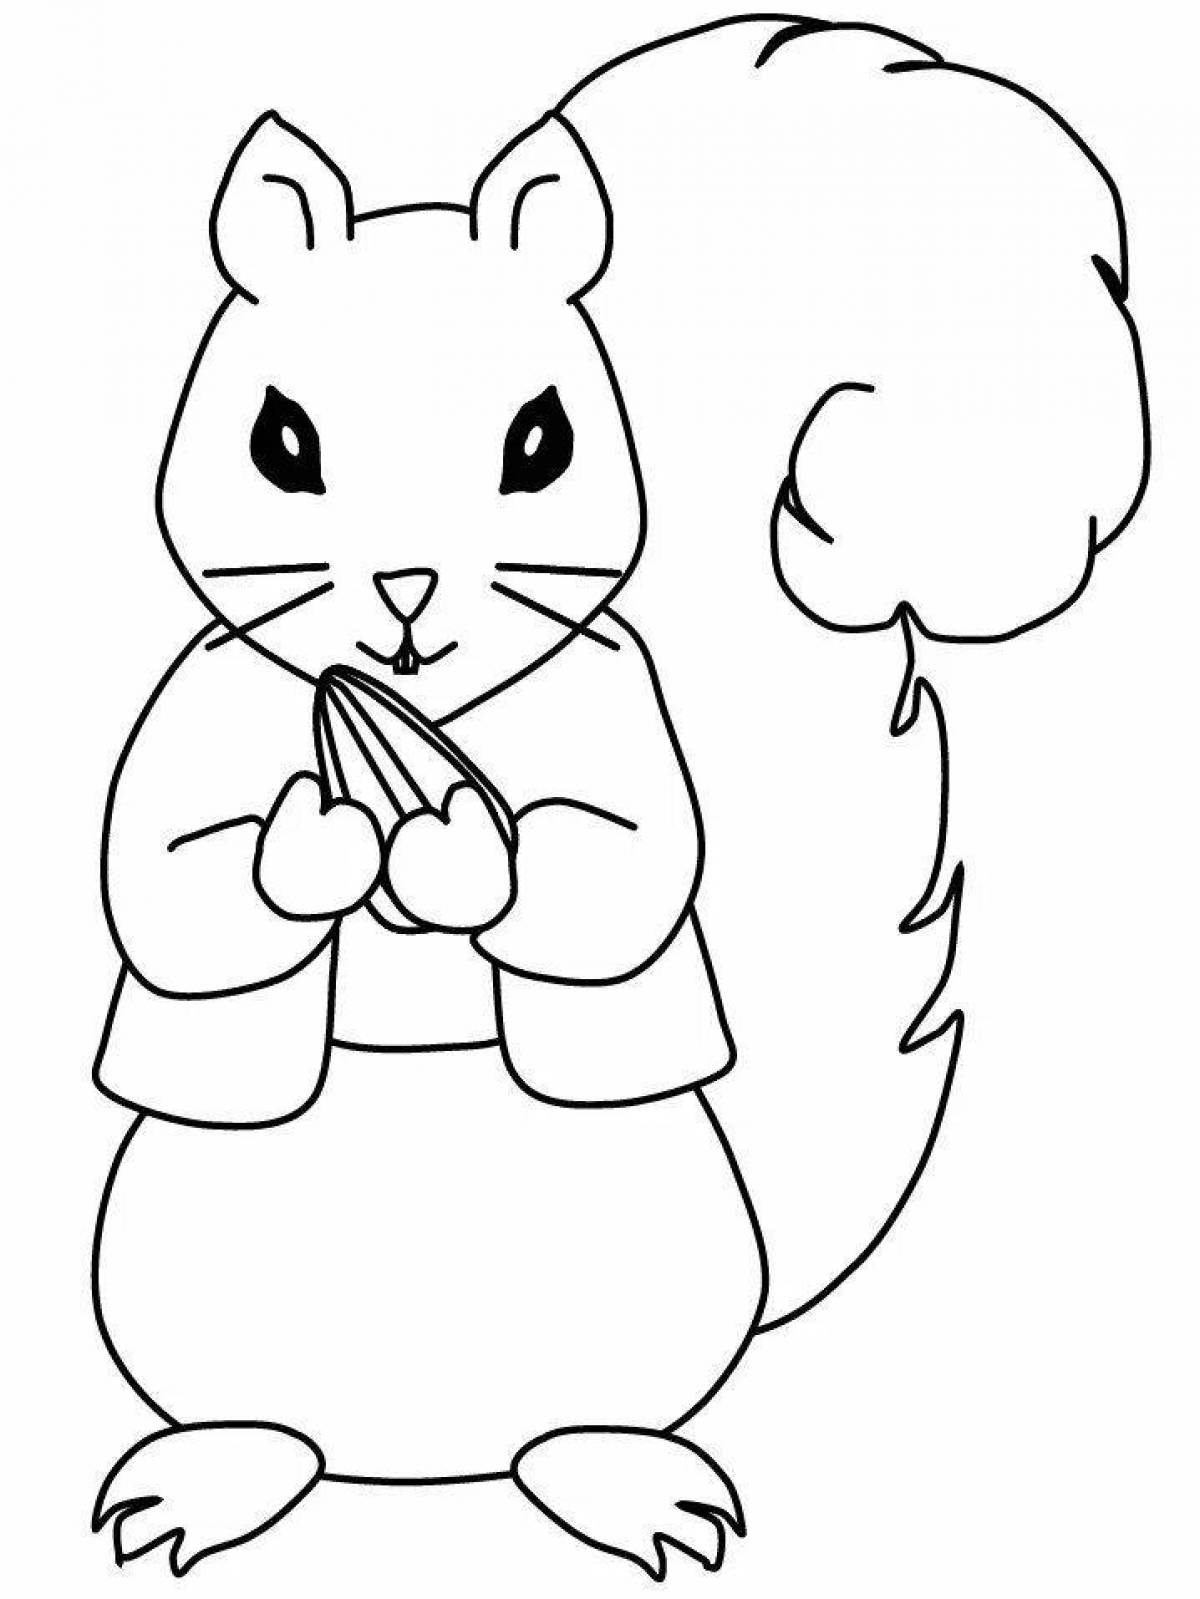 Tempting squirrel coloring for kids